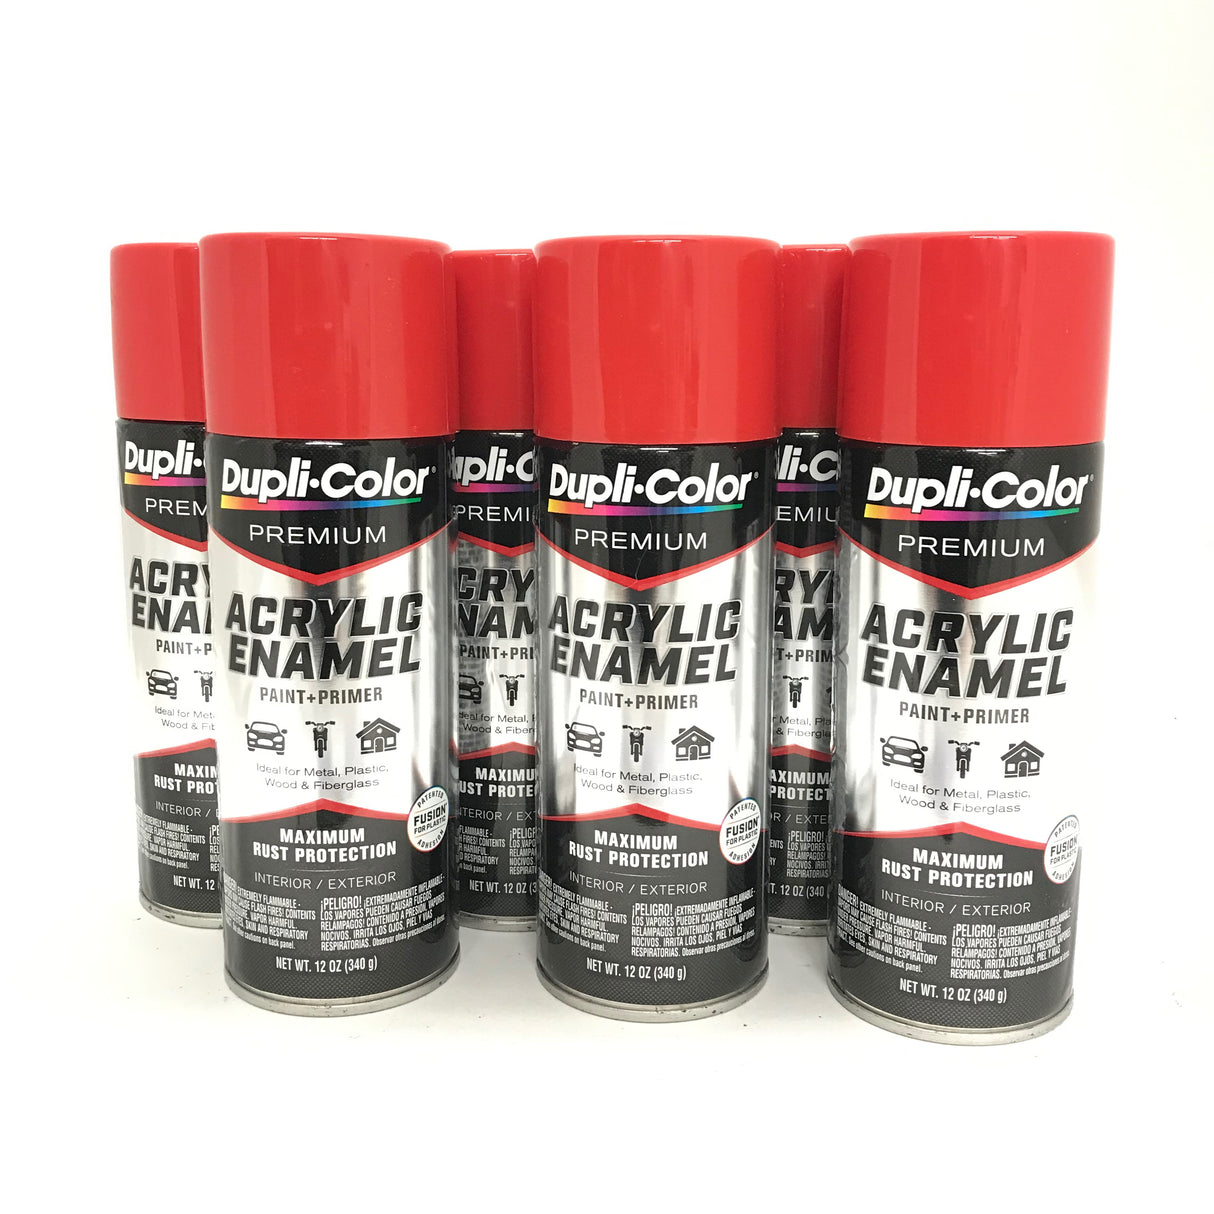 Duplicolor PAE107-6 PACK CHERRY RED Premium Acrylic Enamel - Max Rust Protection - 12 OZ